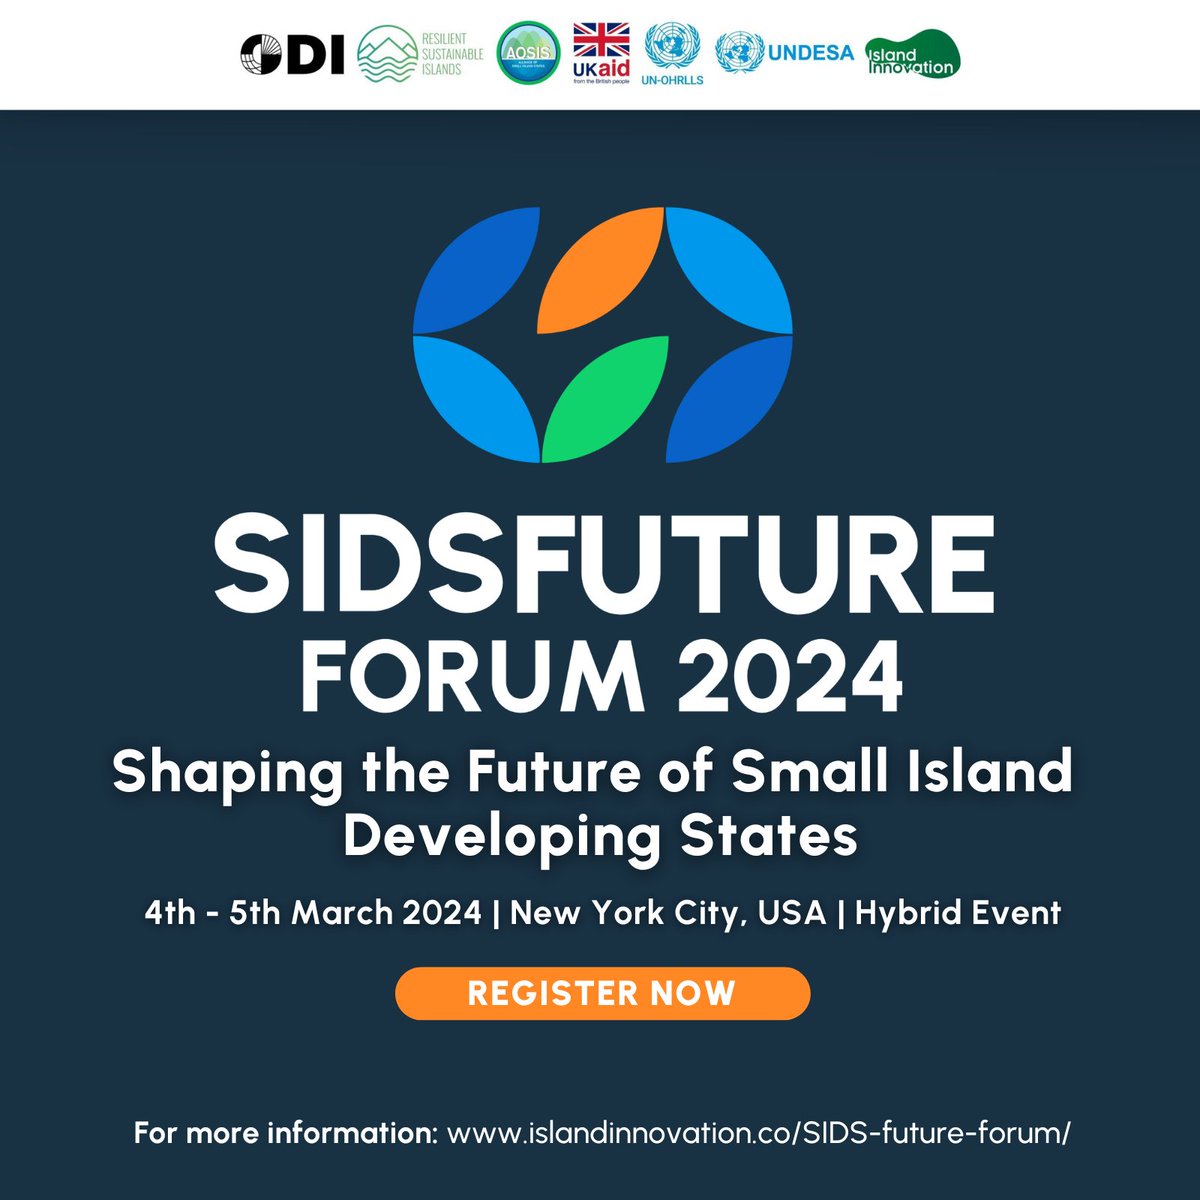 @IslandsInnovate is co-hosting @ODI_RESI's #SIDSFutureForum 2024, a 2-day event focused on high-priority issues faced by island states ahead of the #SIDS4 Conference. Register for 🆓to attend Day 1 of the online event taking place on 4th March: islandinnovation.co/events/sids-fu…